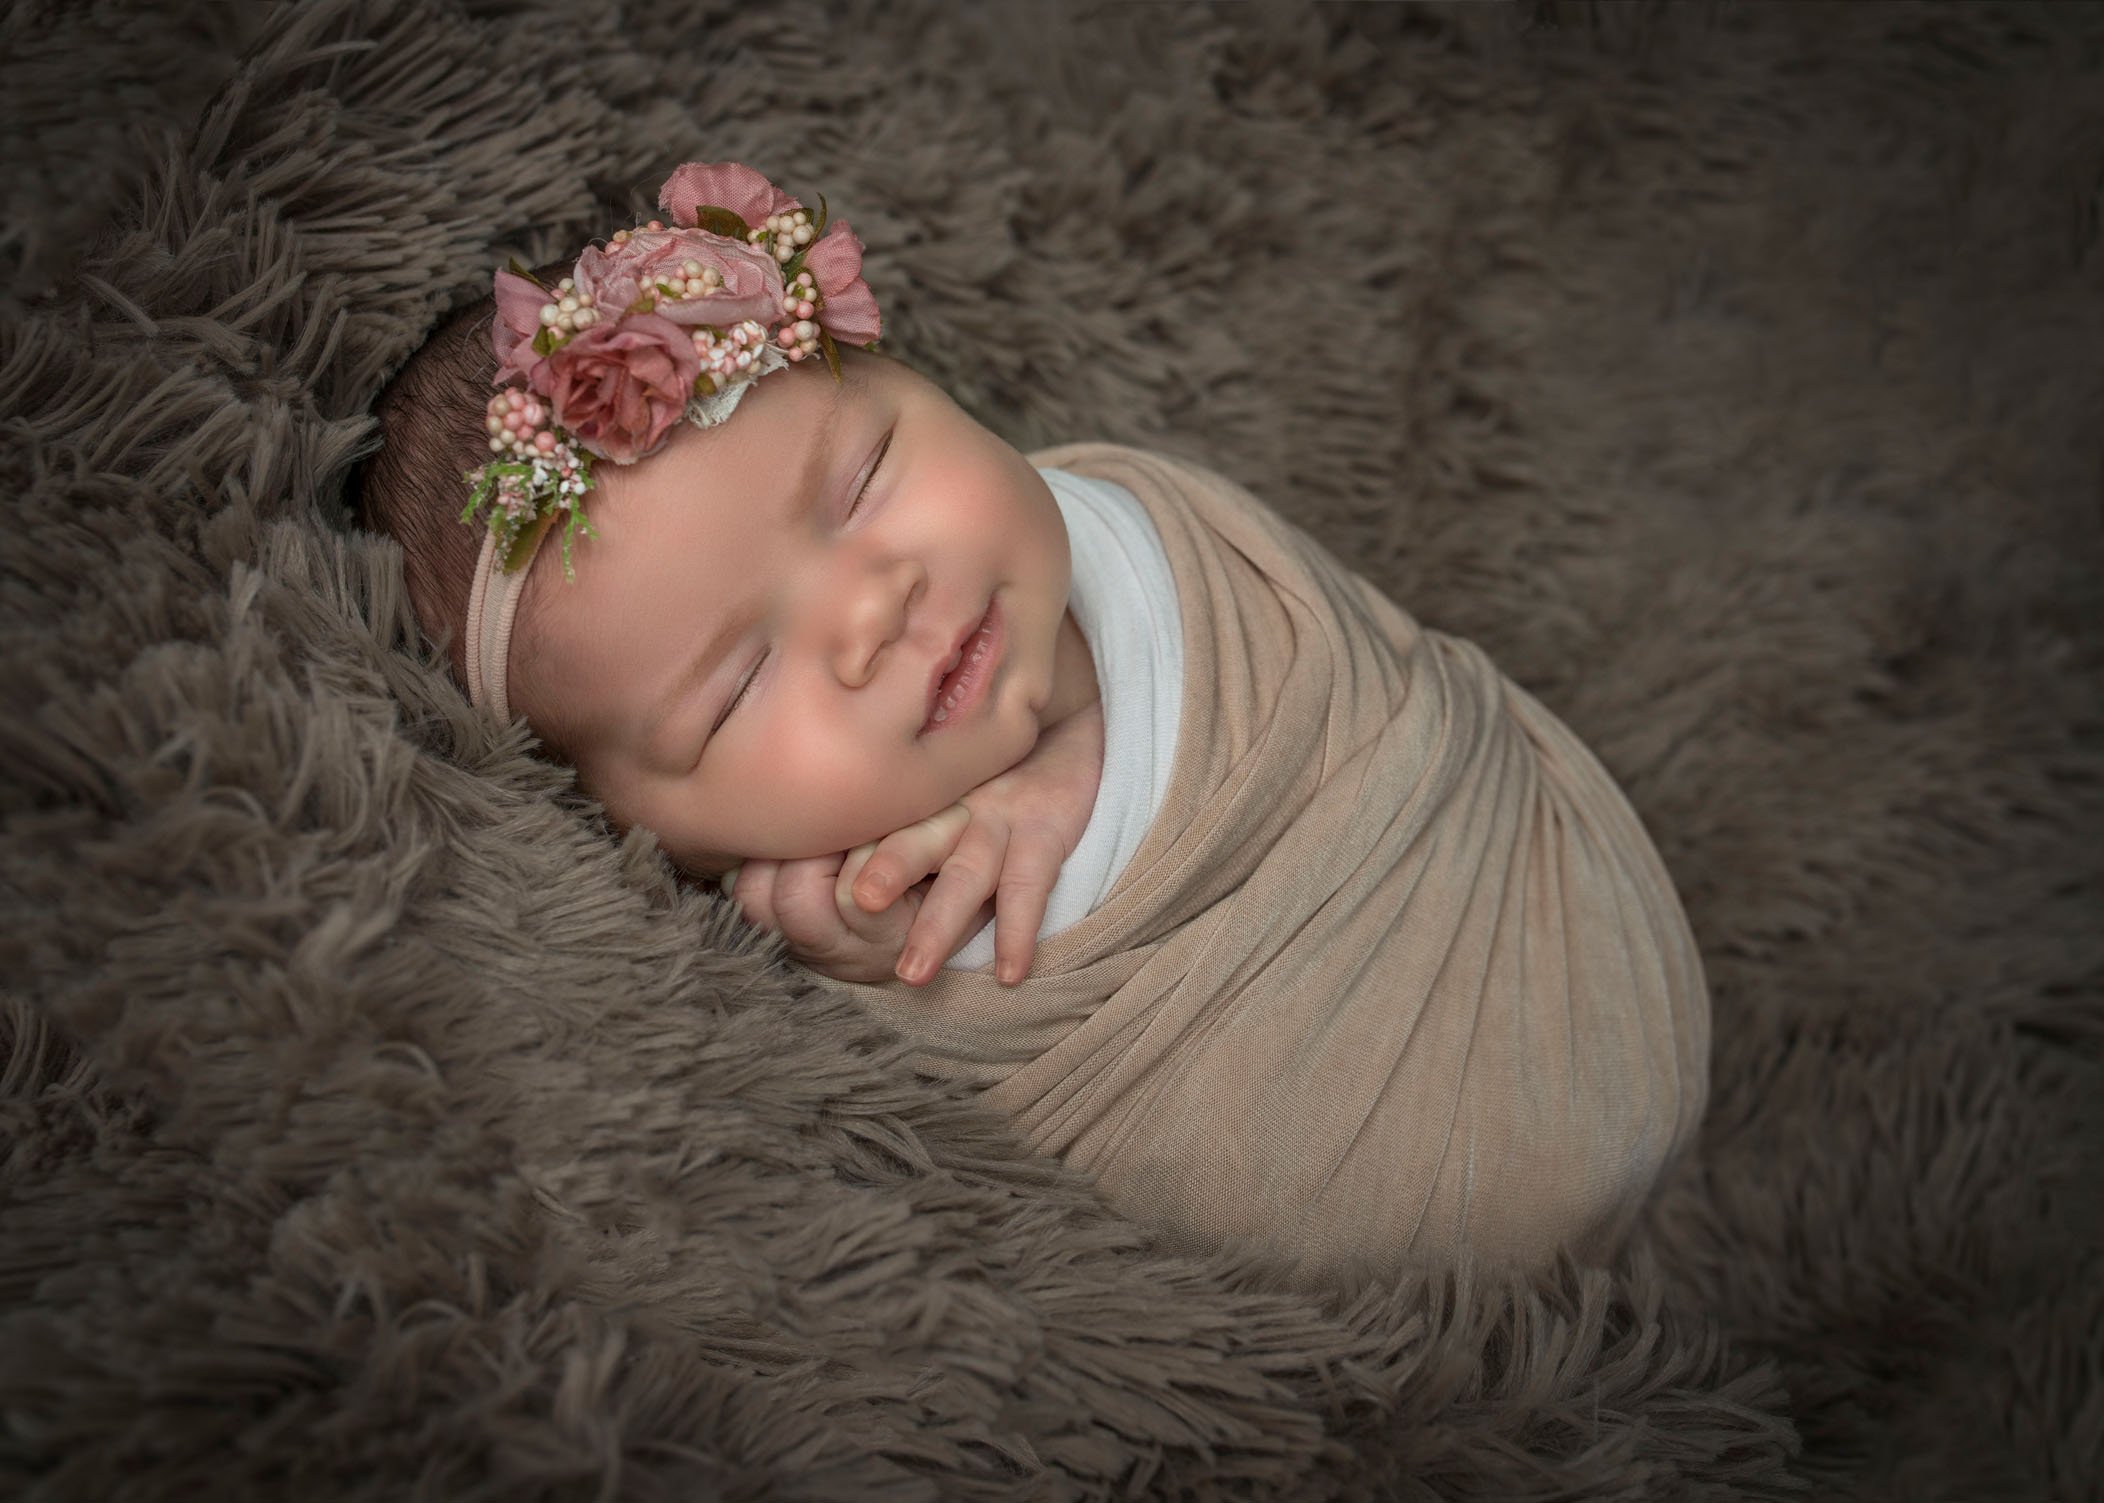 newborn baby girl wrapped up sleeping on brown fur smiling